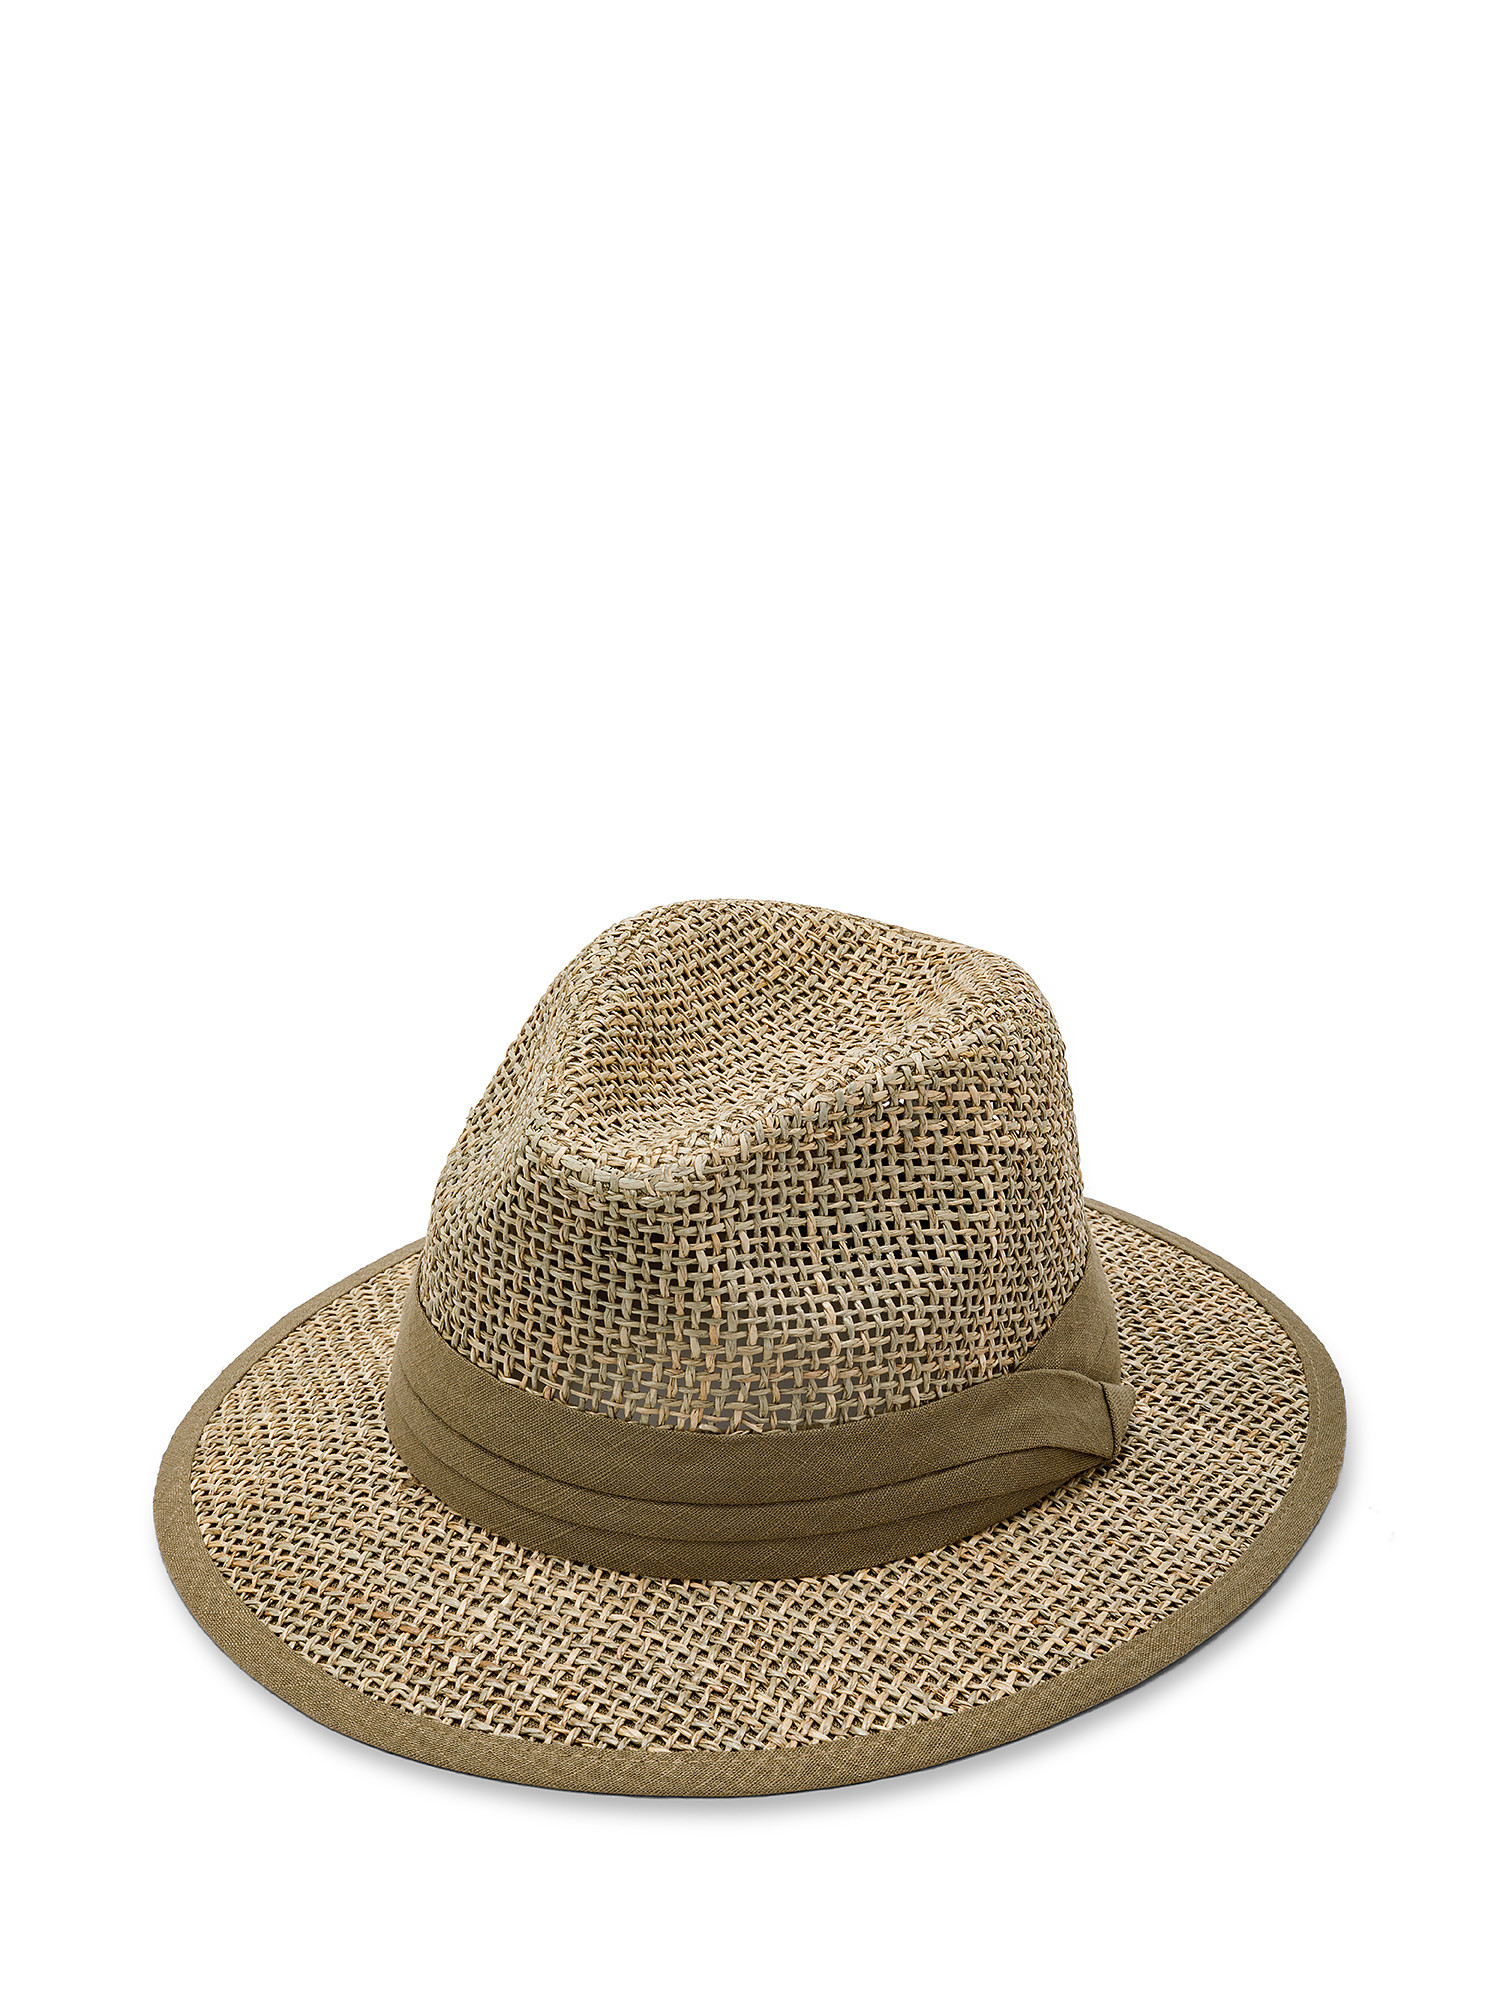 Luca D'Altieri - Straw hat with strap, Beige, large image number 0